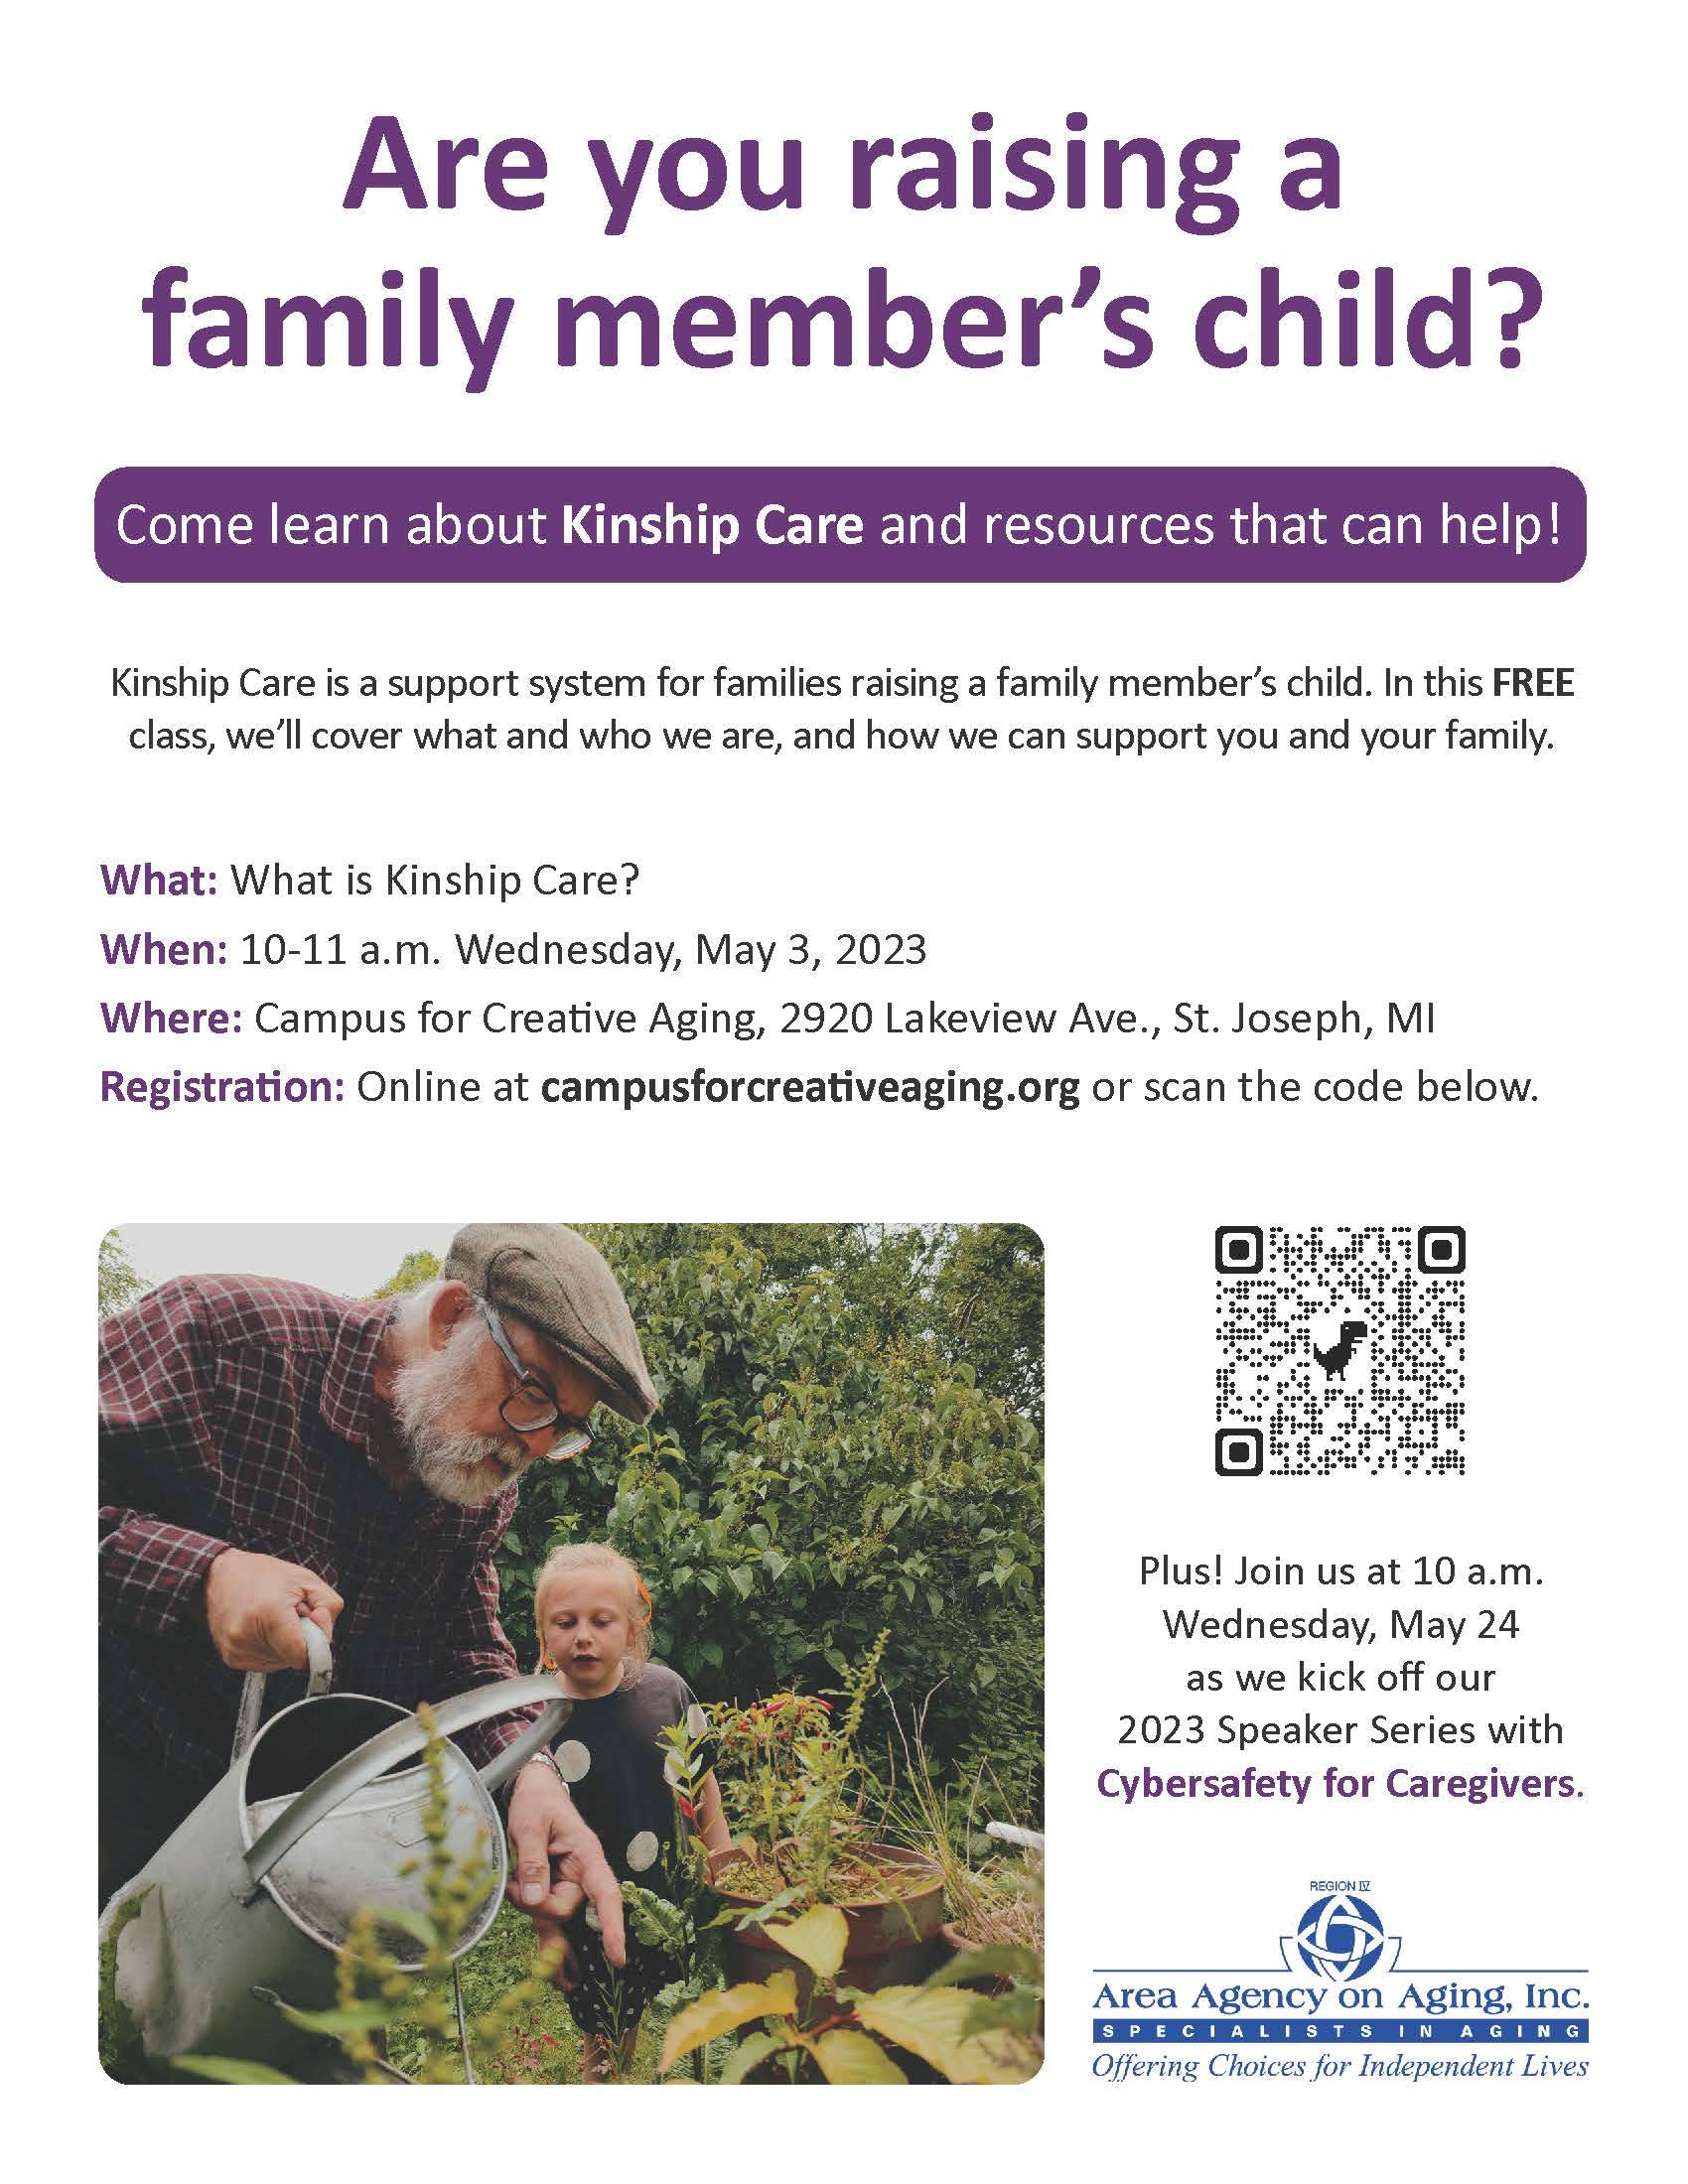 What is Kinship Care? Campus for Creative Aging